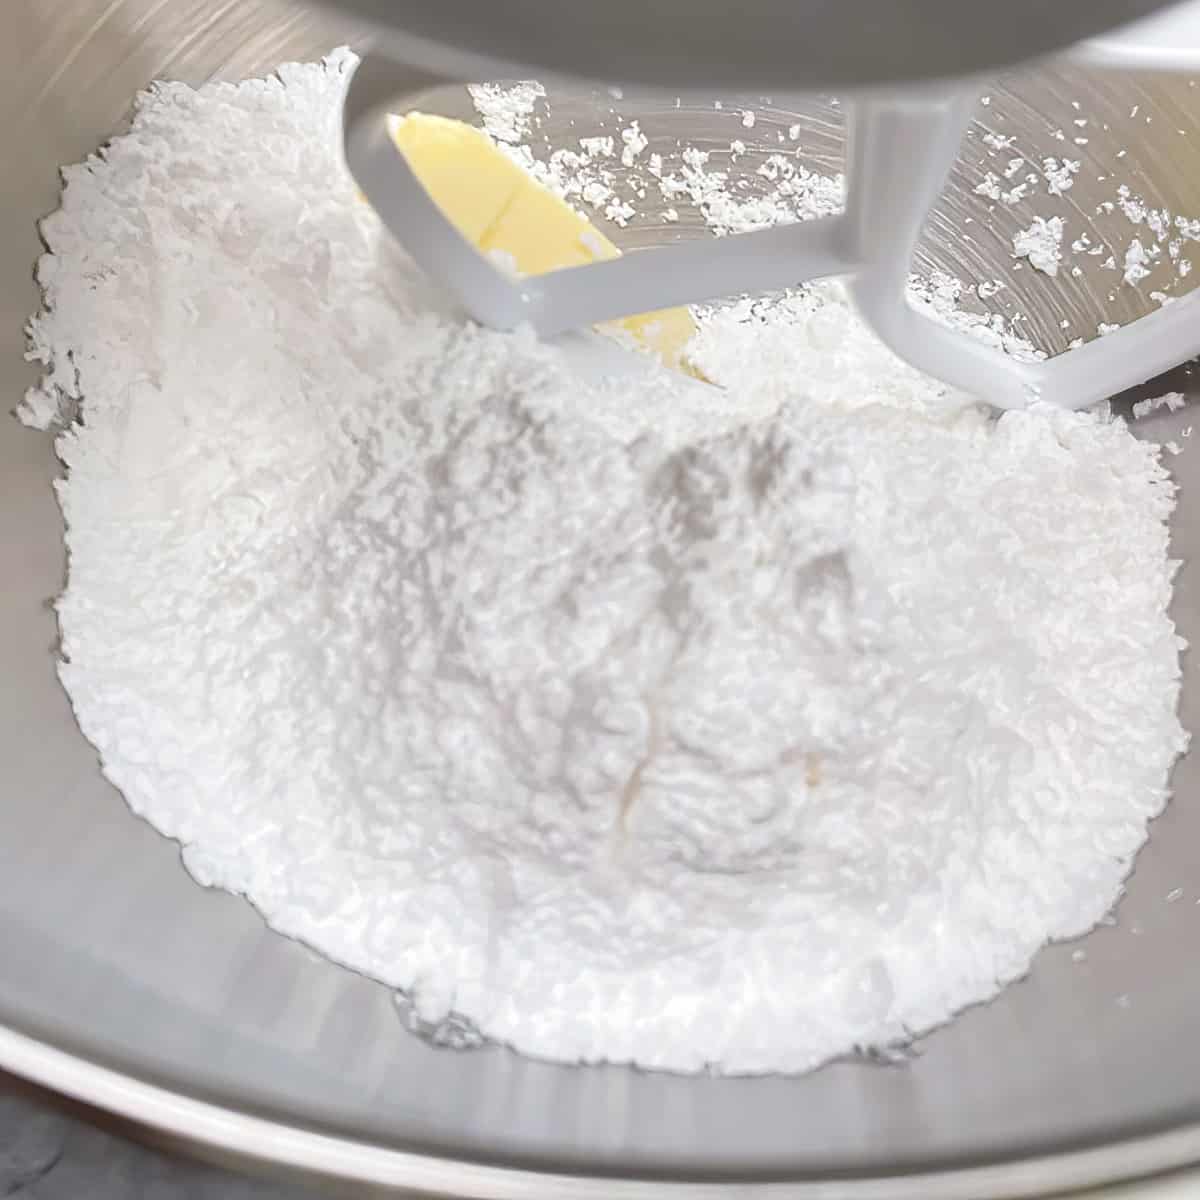 Powdered sugar in the mixer bowl for caramel buttercream icing.